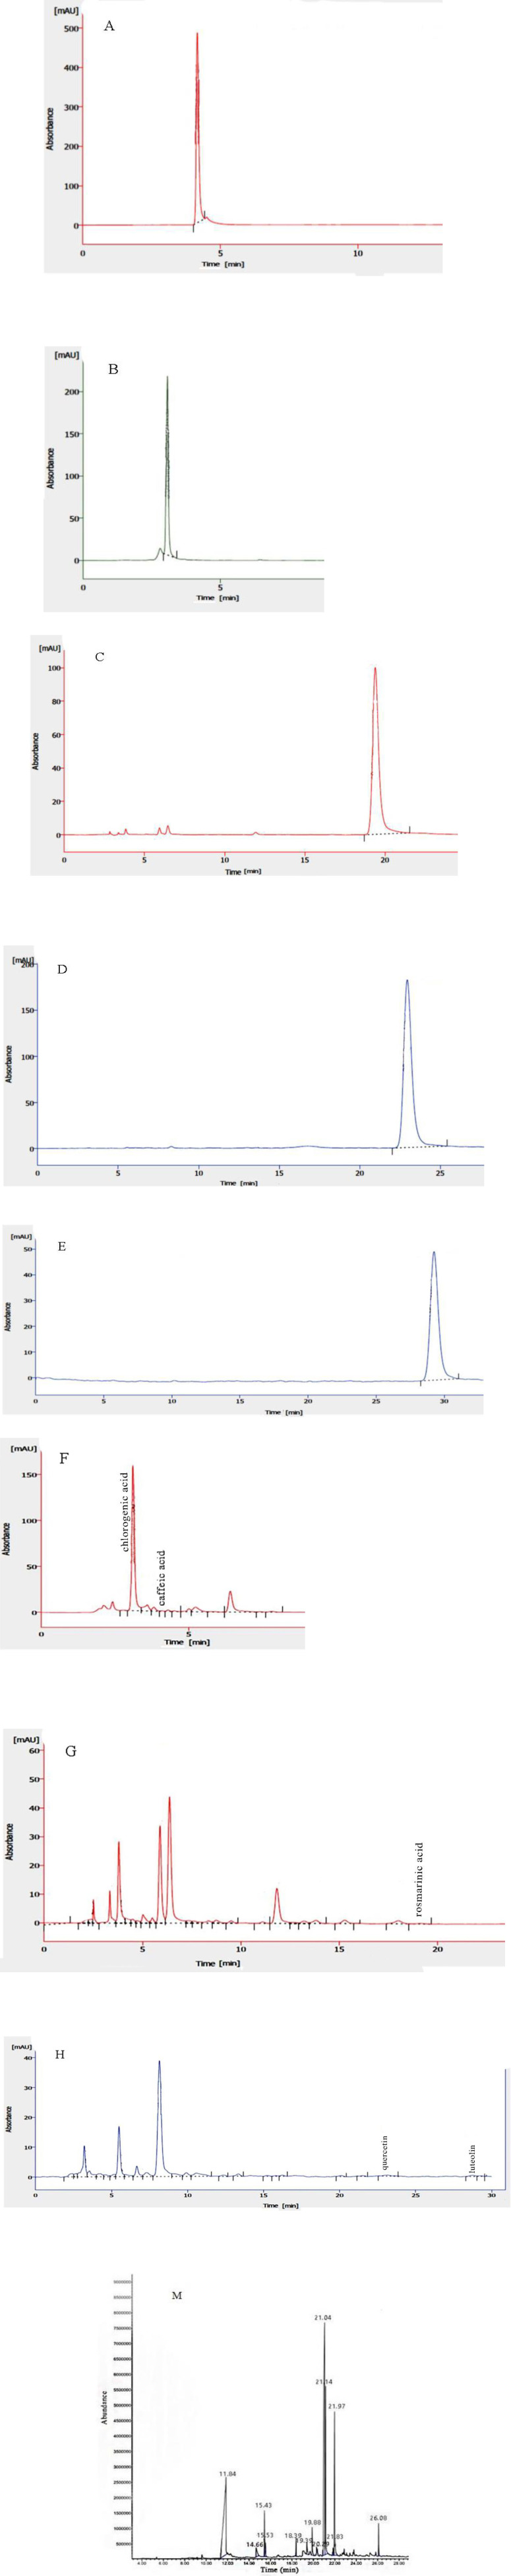 HPLC chromatograms obtained from standards including A: caffeic acid, B: chlorogenic acid, C: rosmarinic acid, D: quercetin, E: luteolin and LOE samples (F, G, H). GC-MS spectral chromatogram of LOE (M).